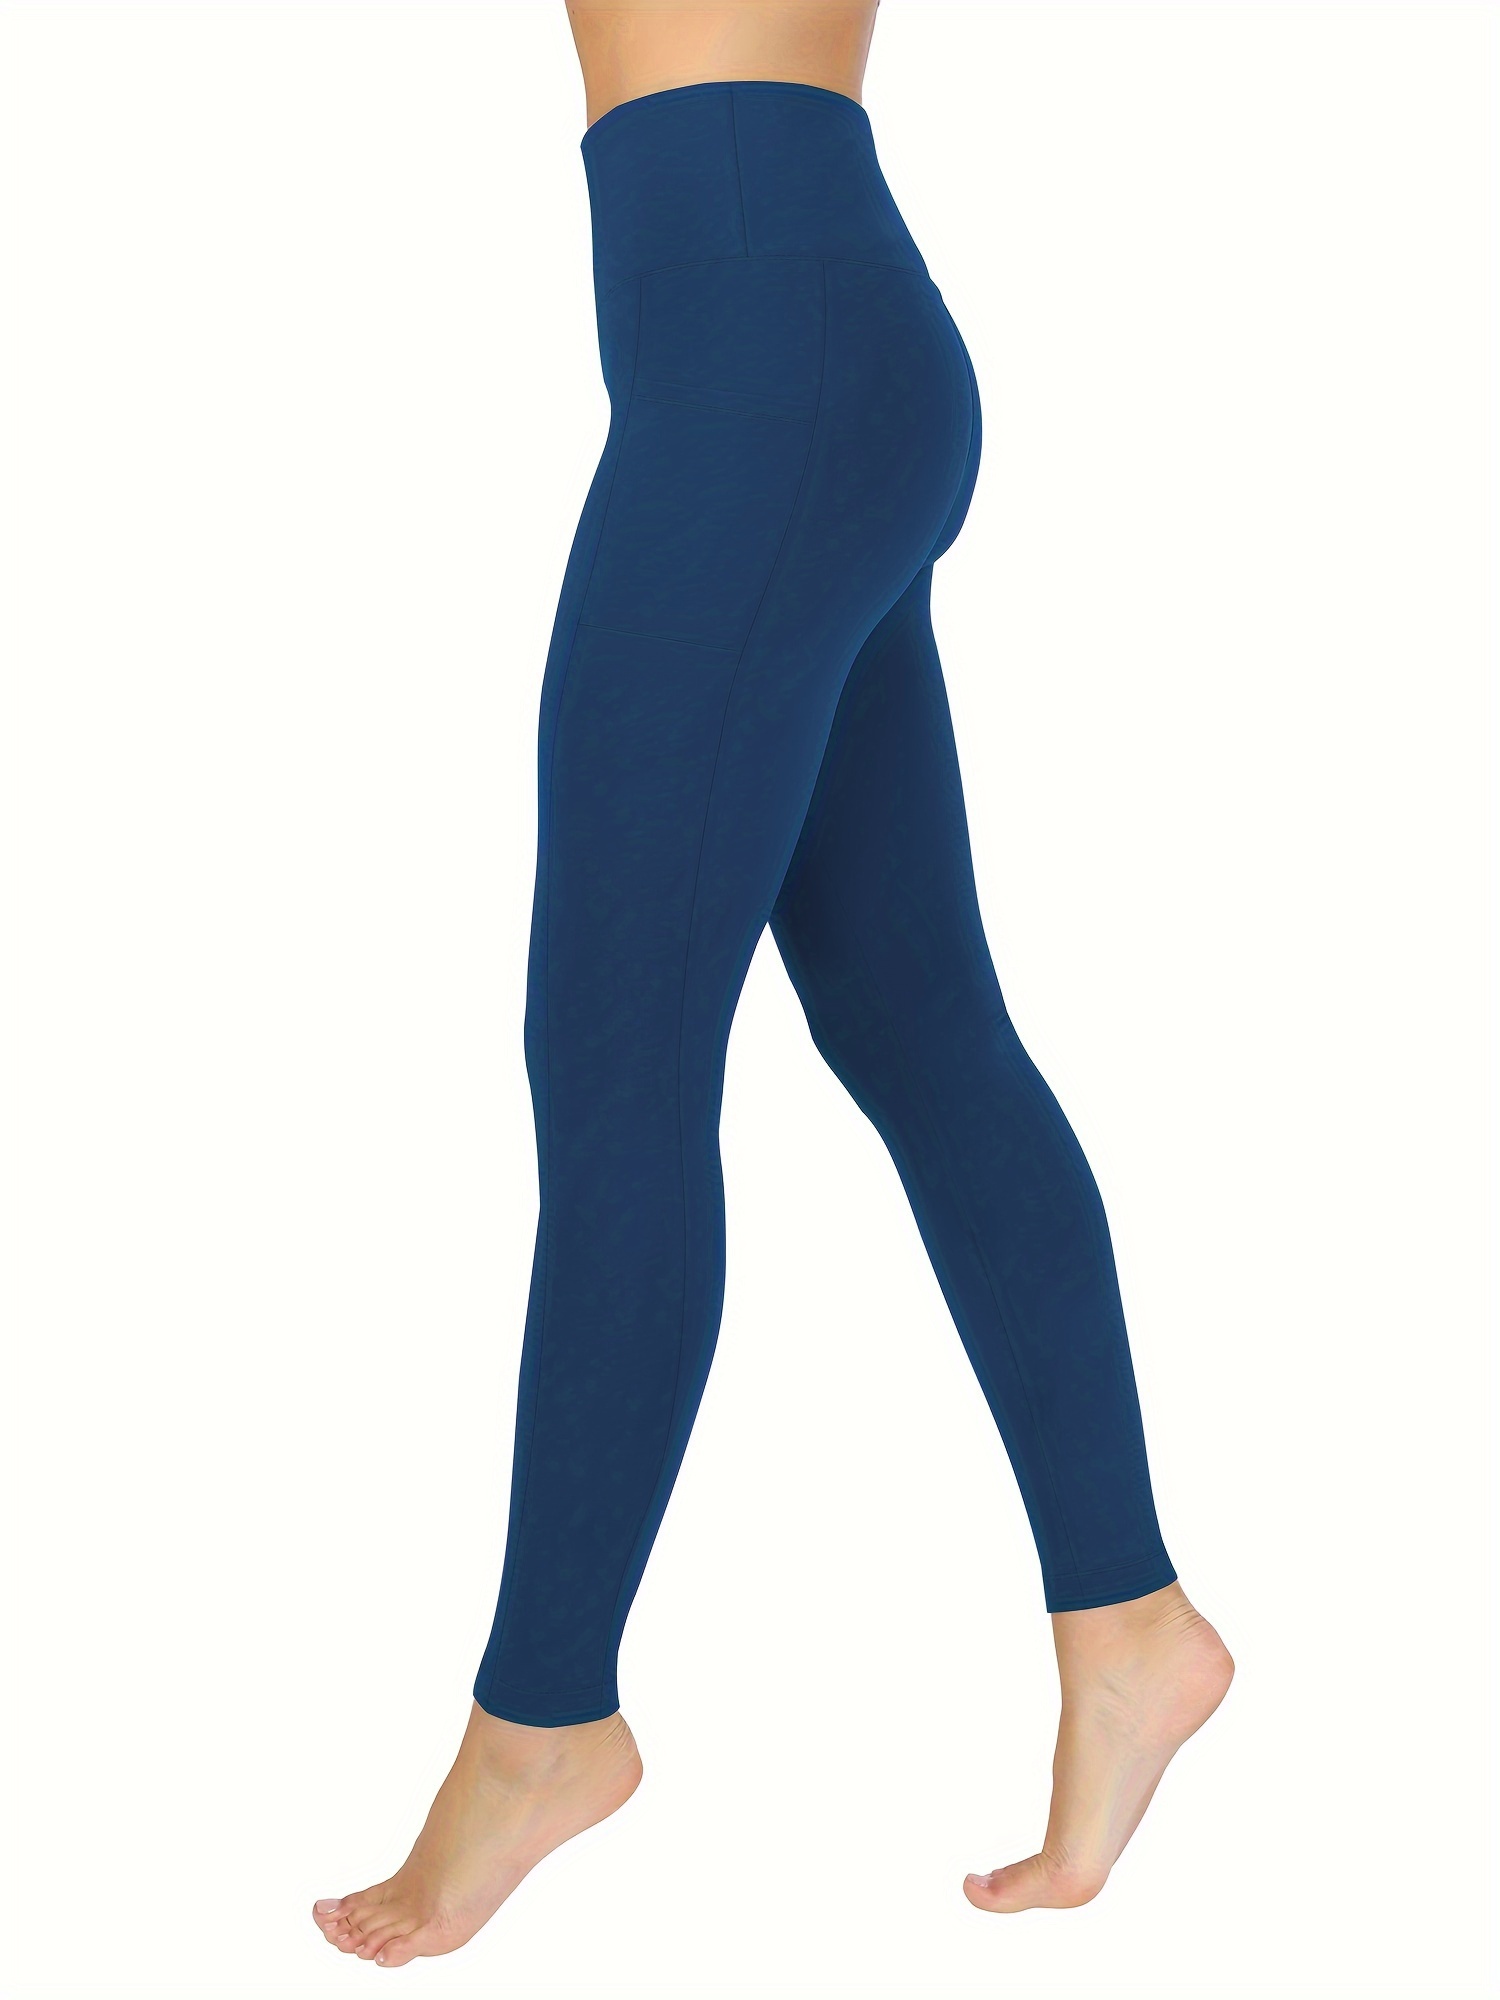 Solid Royal Blue Leggings With Pockets